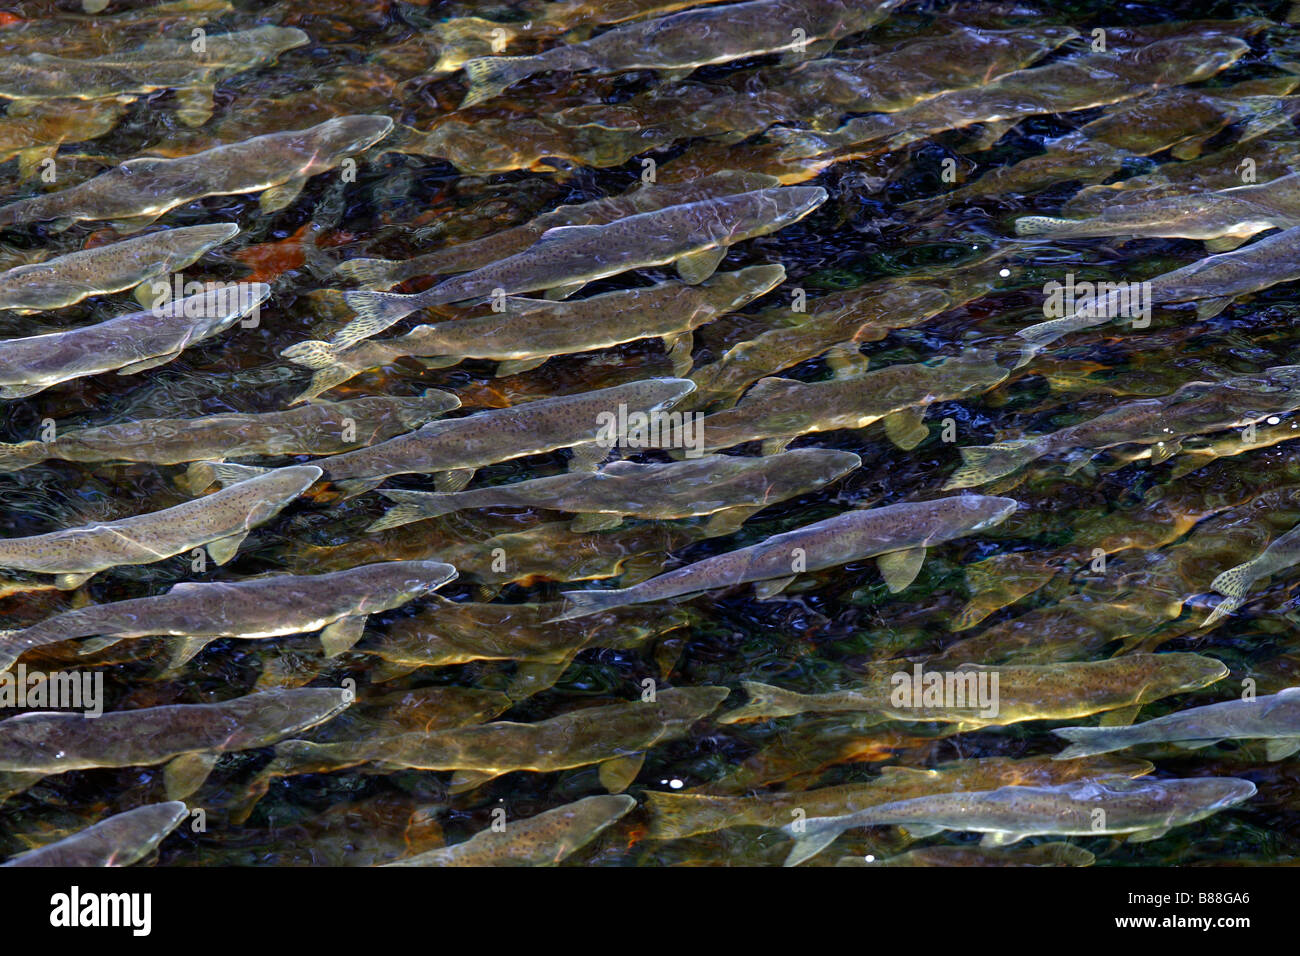 Humpback Salmon, Pink Salmon (Oncorhynchus gorbuscha). Migrating fishes returning into their spawning stream near Glen Cove Stock Photo